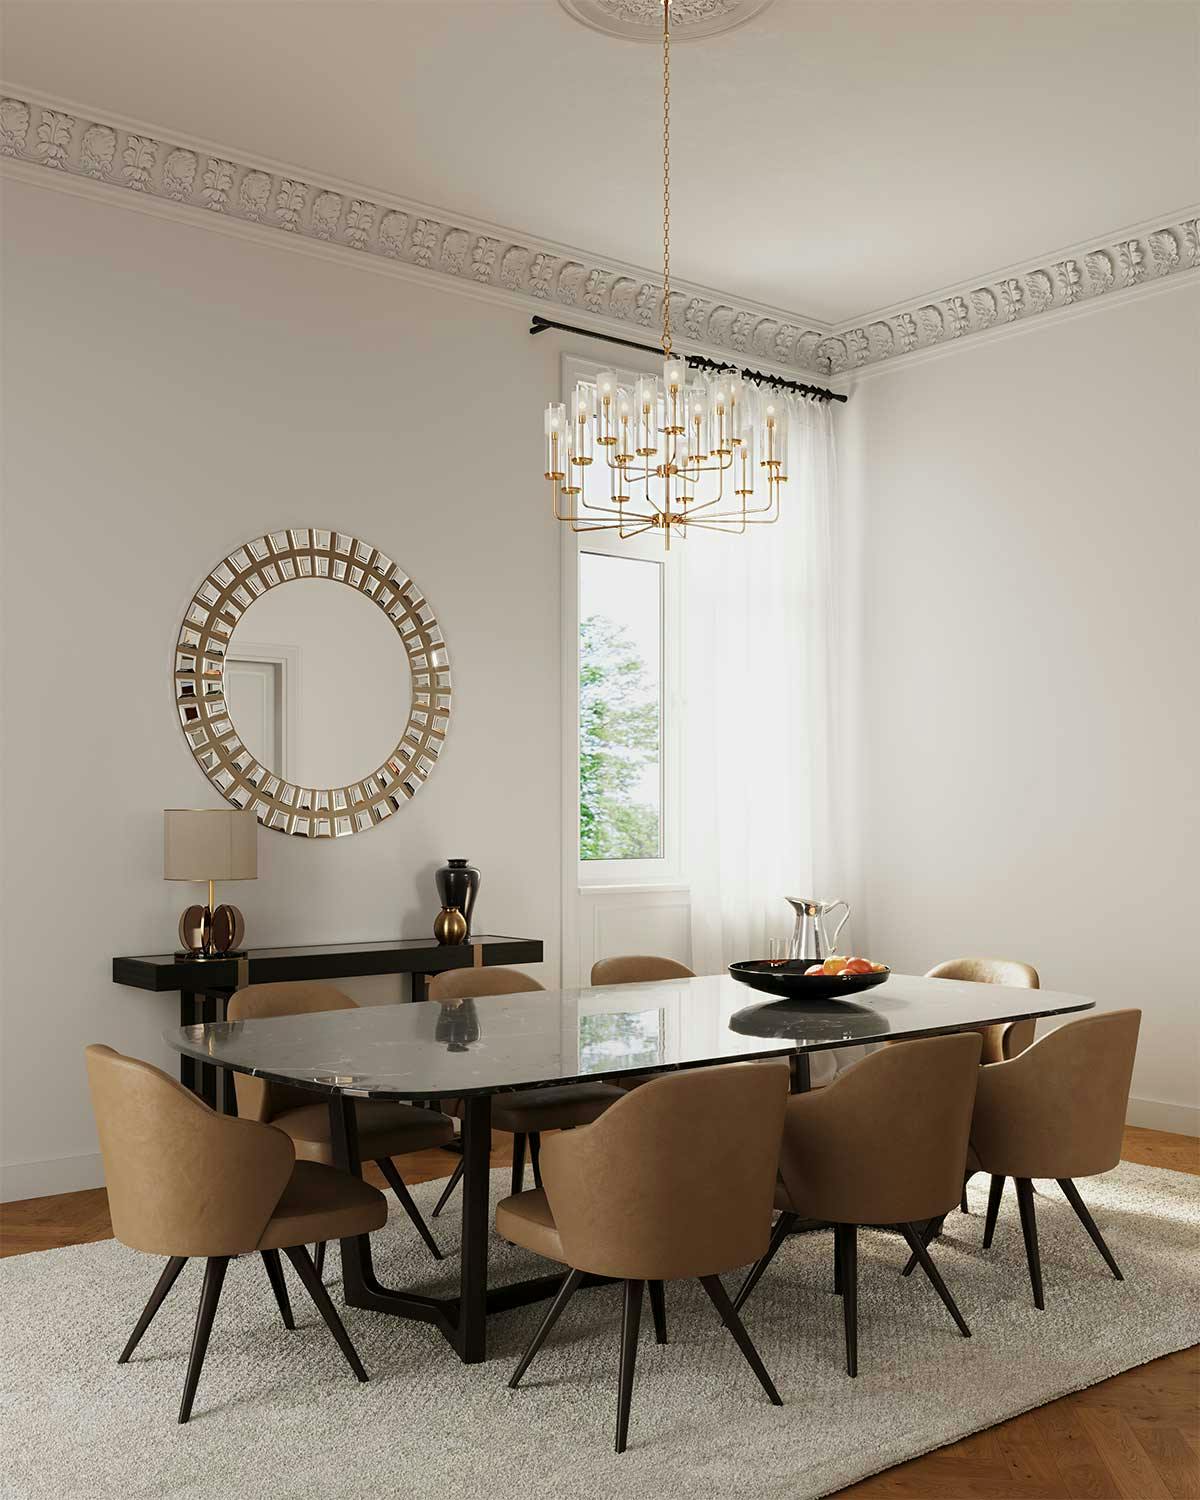 3D Interior Visualization with the design concept of a dining room in a historic apartment in Hamburg.